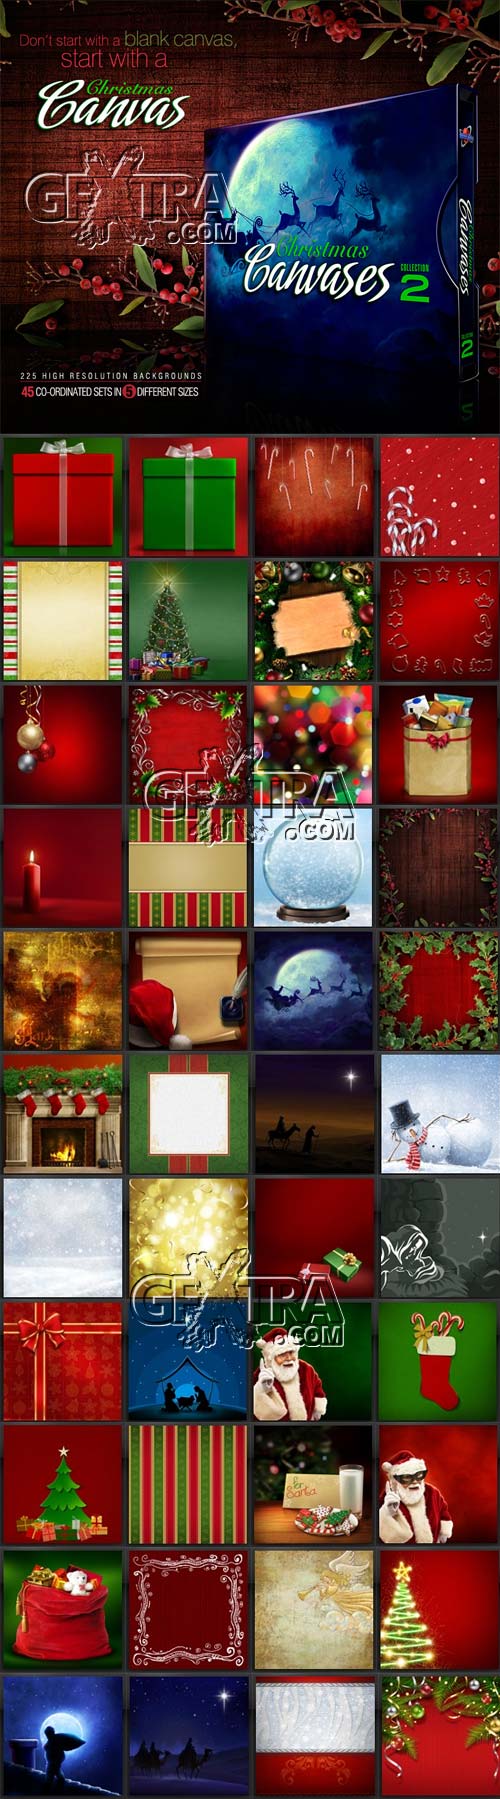 Christmas Canvases Collection II, 225 JPG Backgrounds